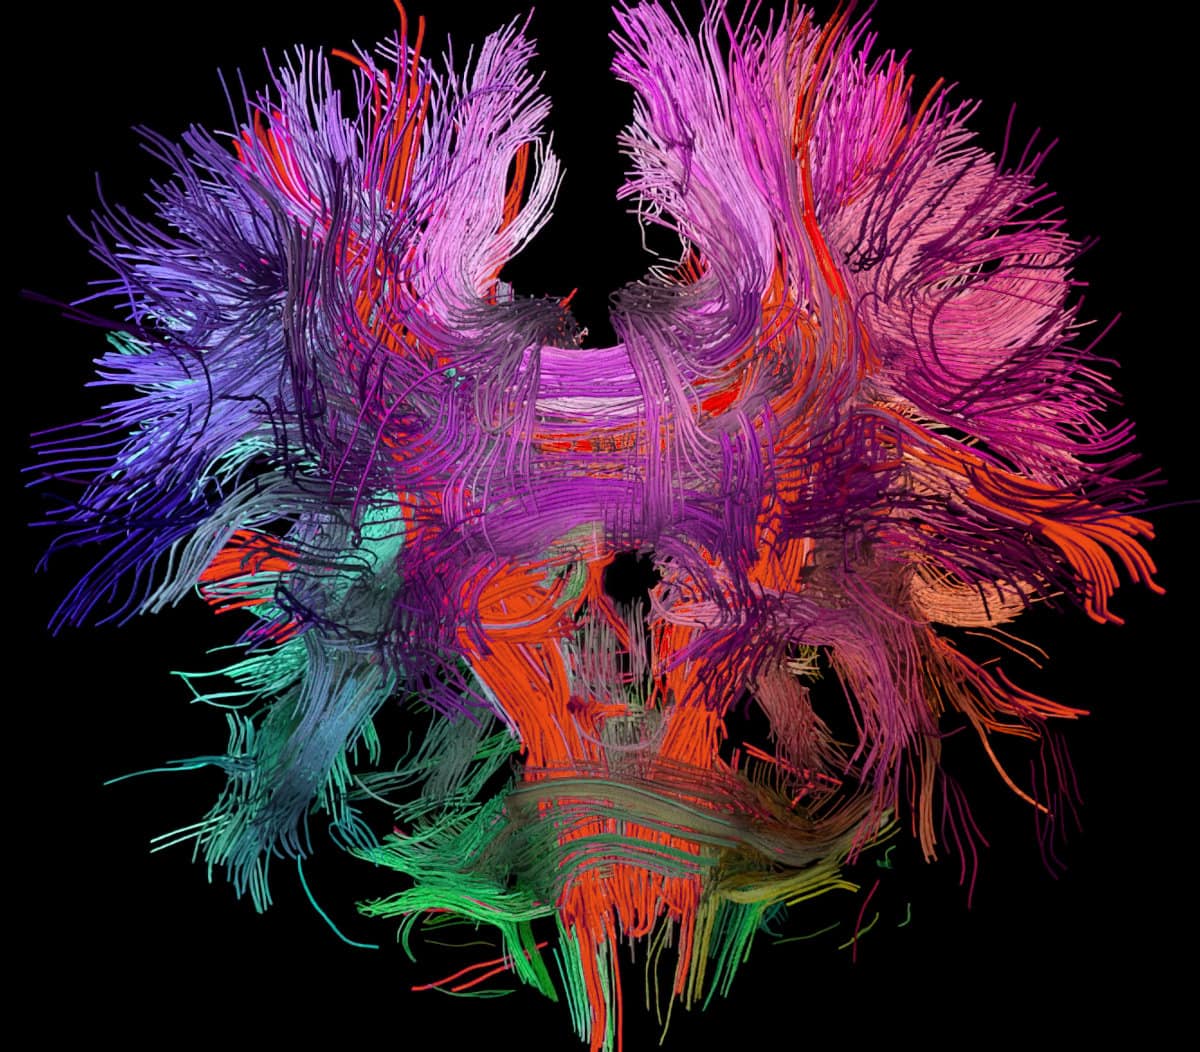 Neural connections in the human brain